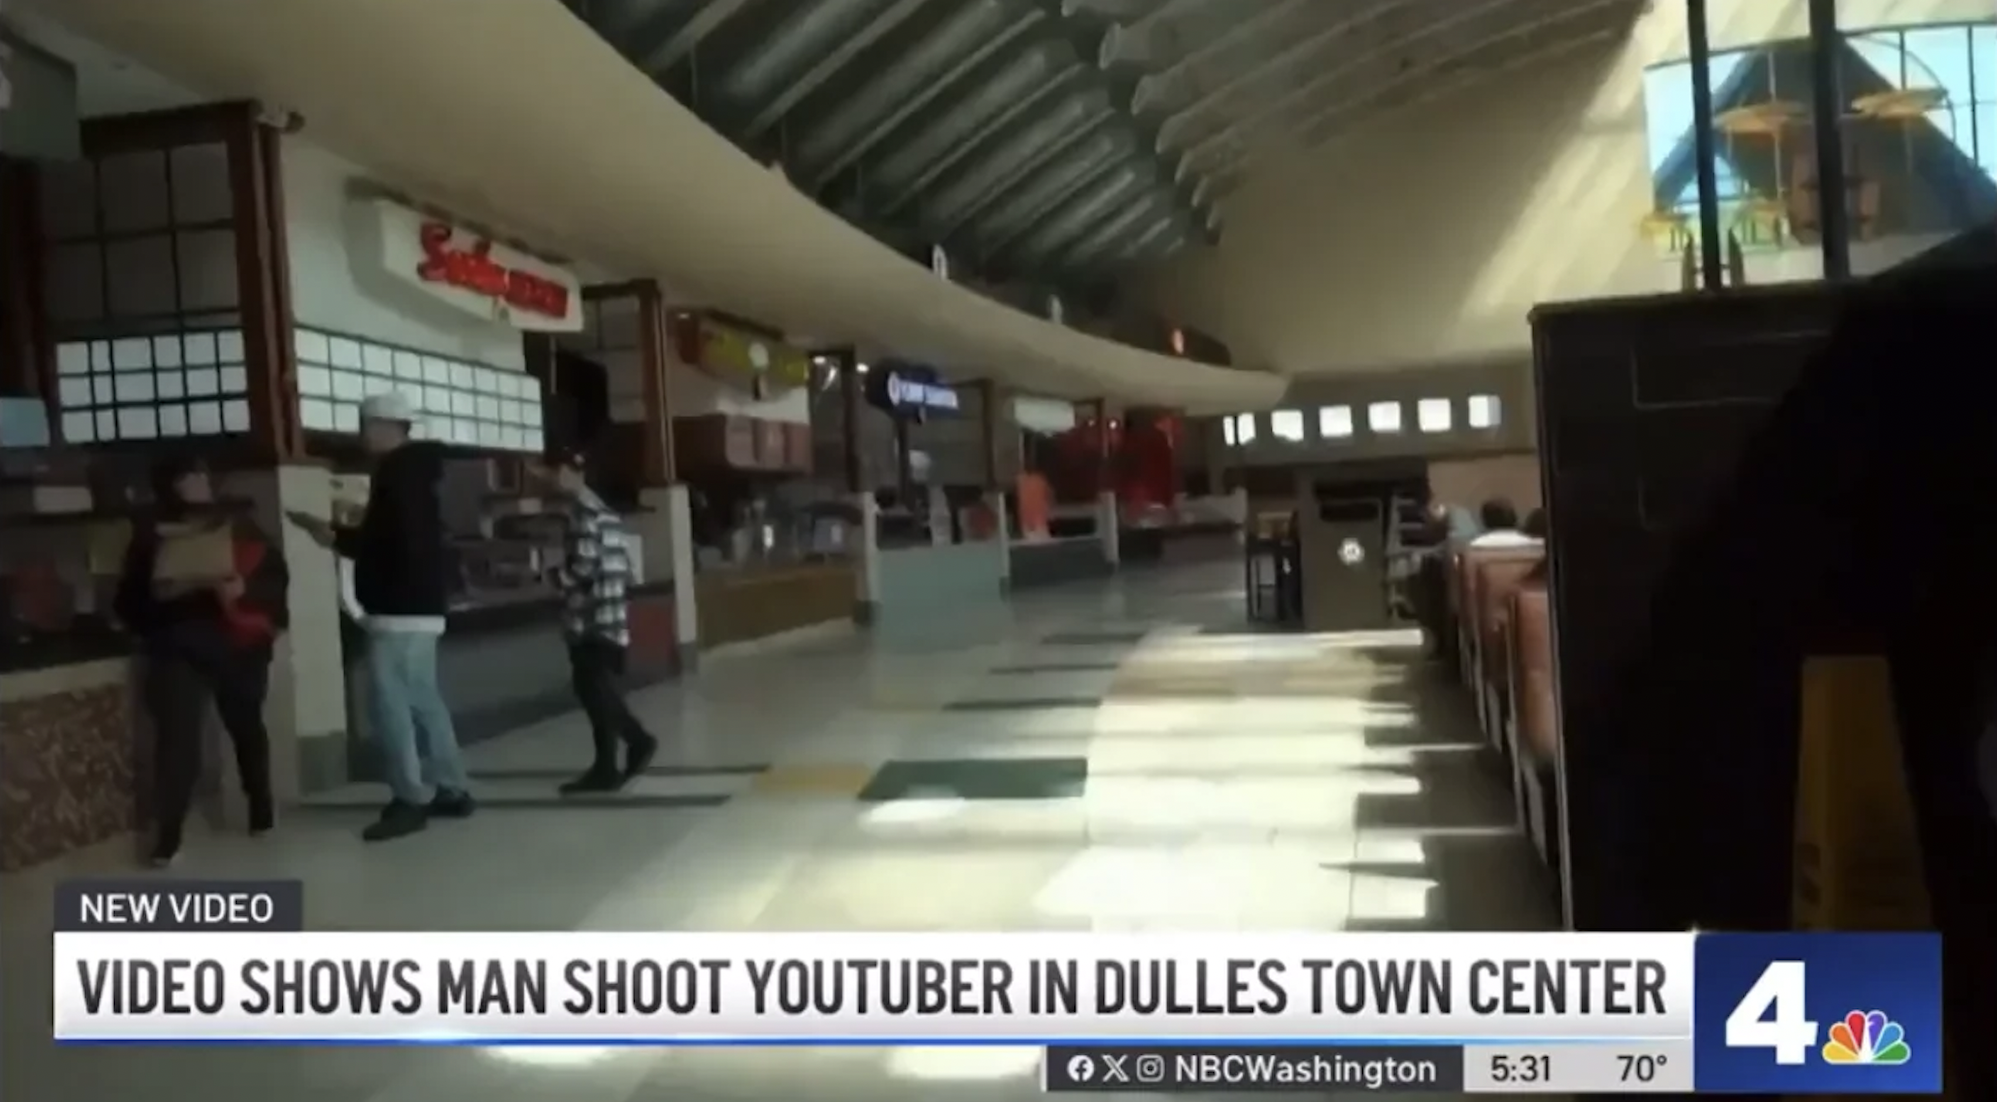 man shoots youtube prankster - New Video Video Shows Man Shoot Youtuber In Dulles Town Center 4 Ox 70